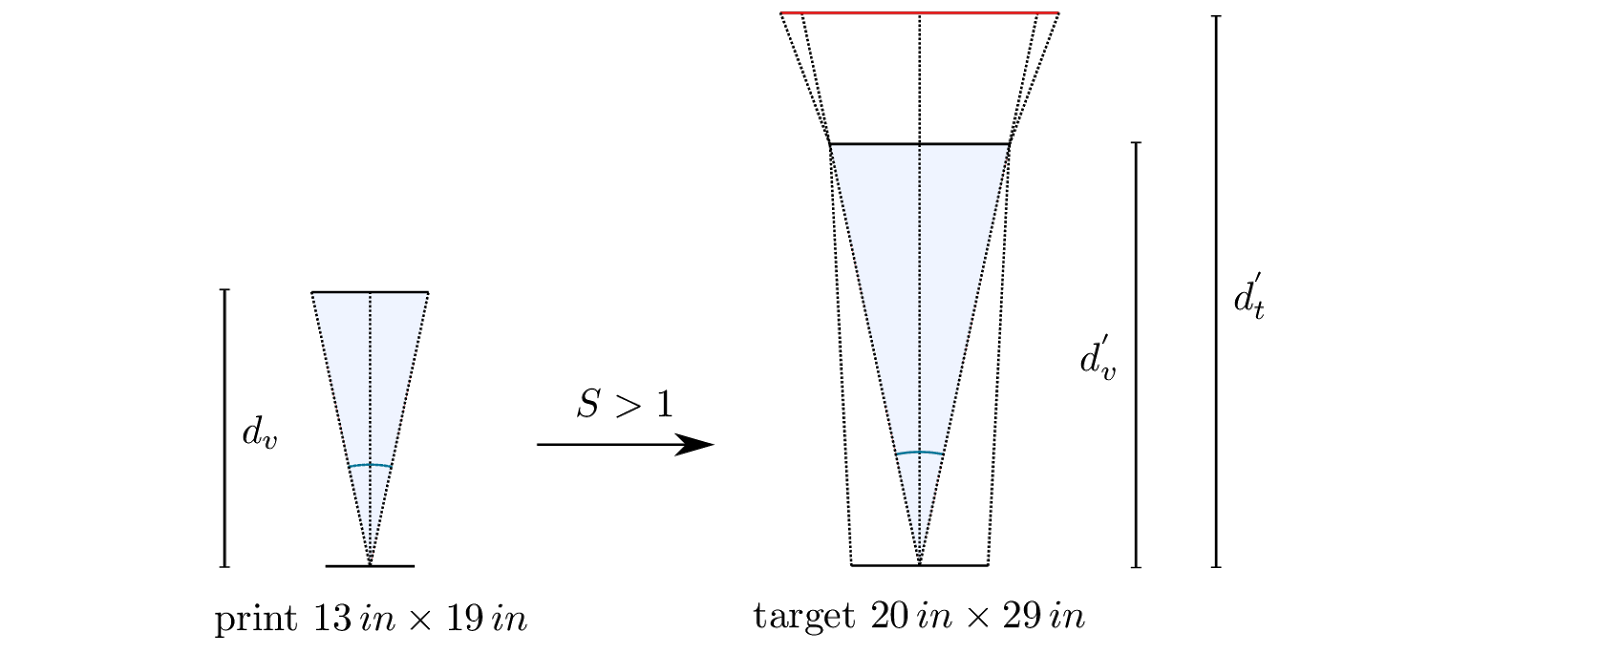 Mechanical pitch in lenticular layout